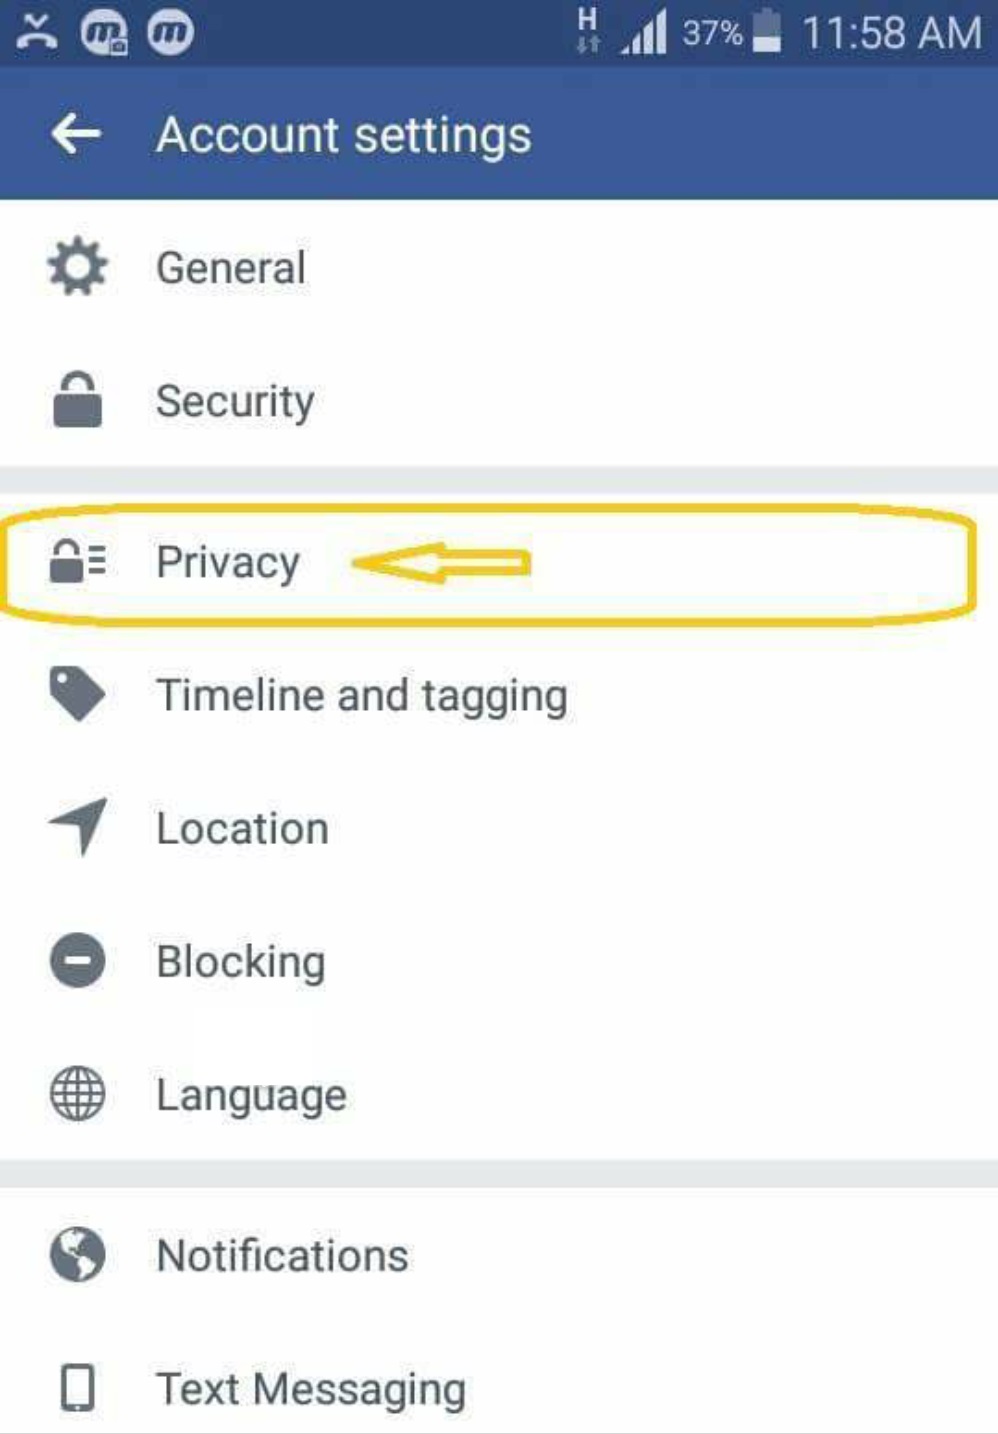 Please select privacy tab to set up your privacy setting on mobile phones and email address.